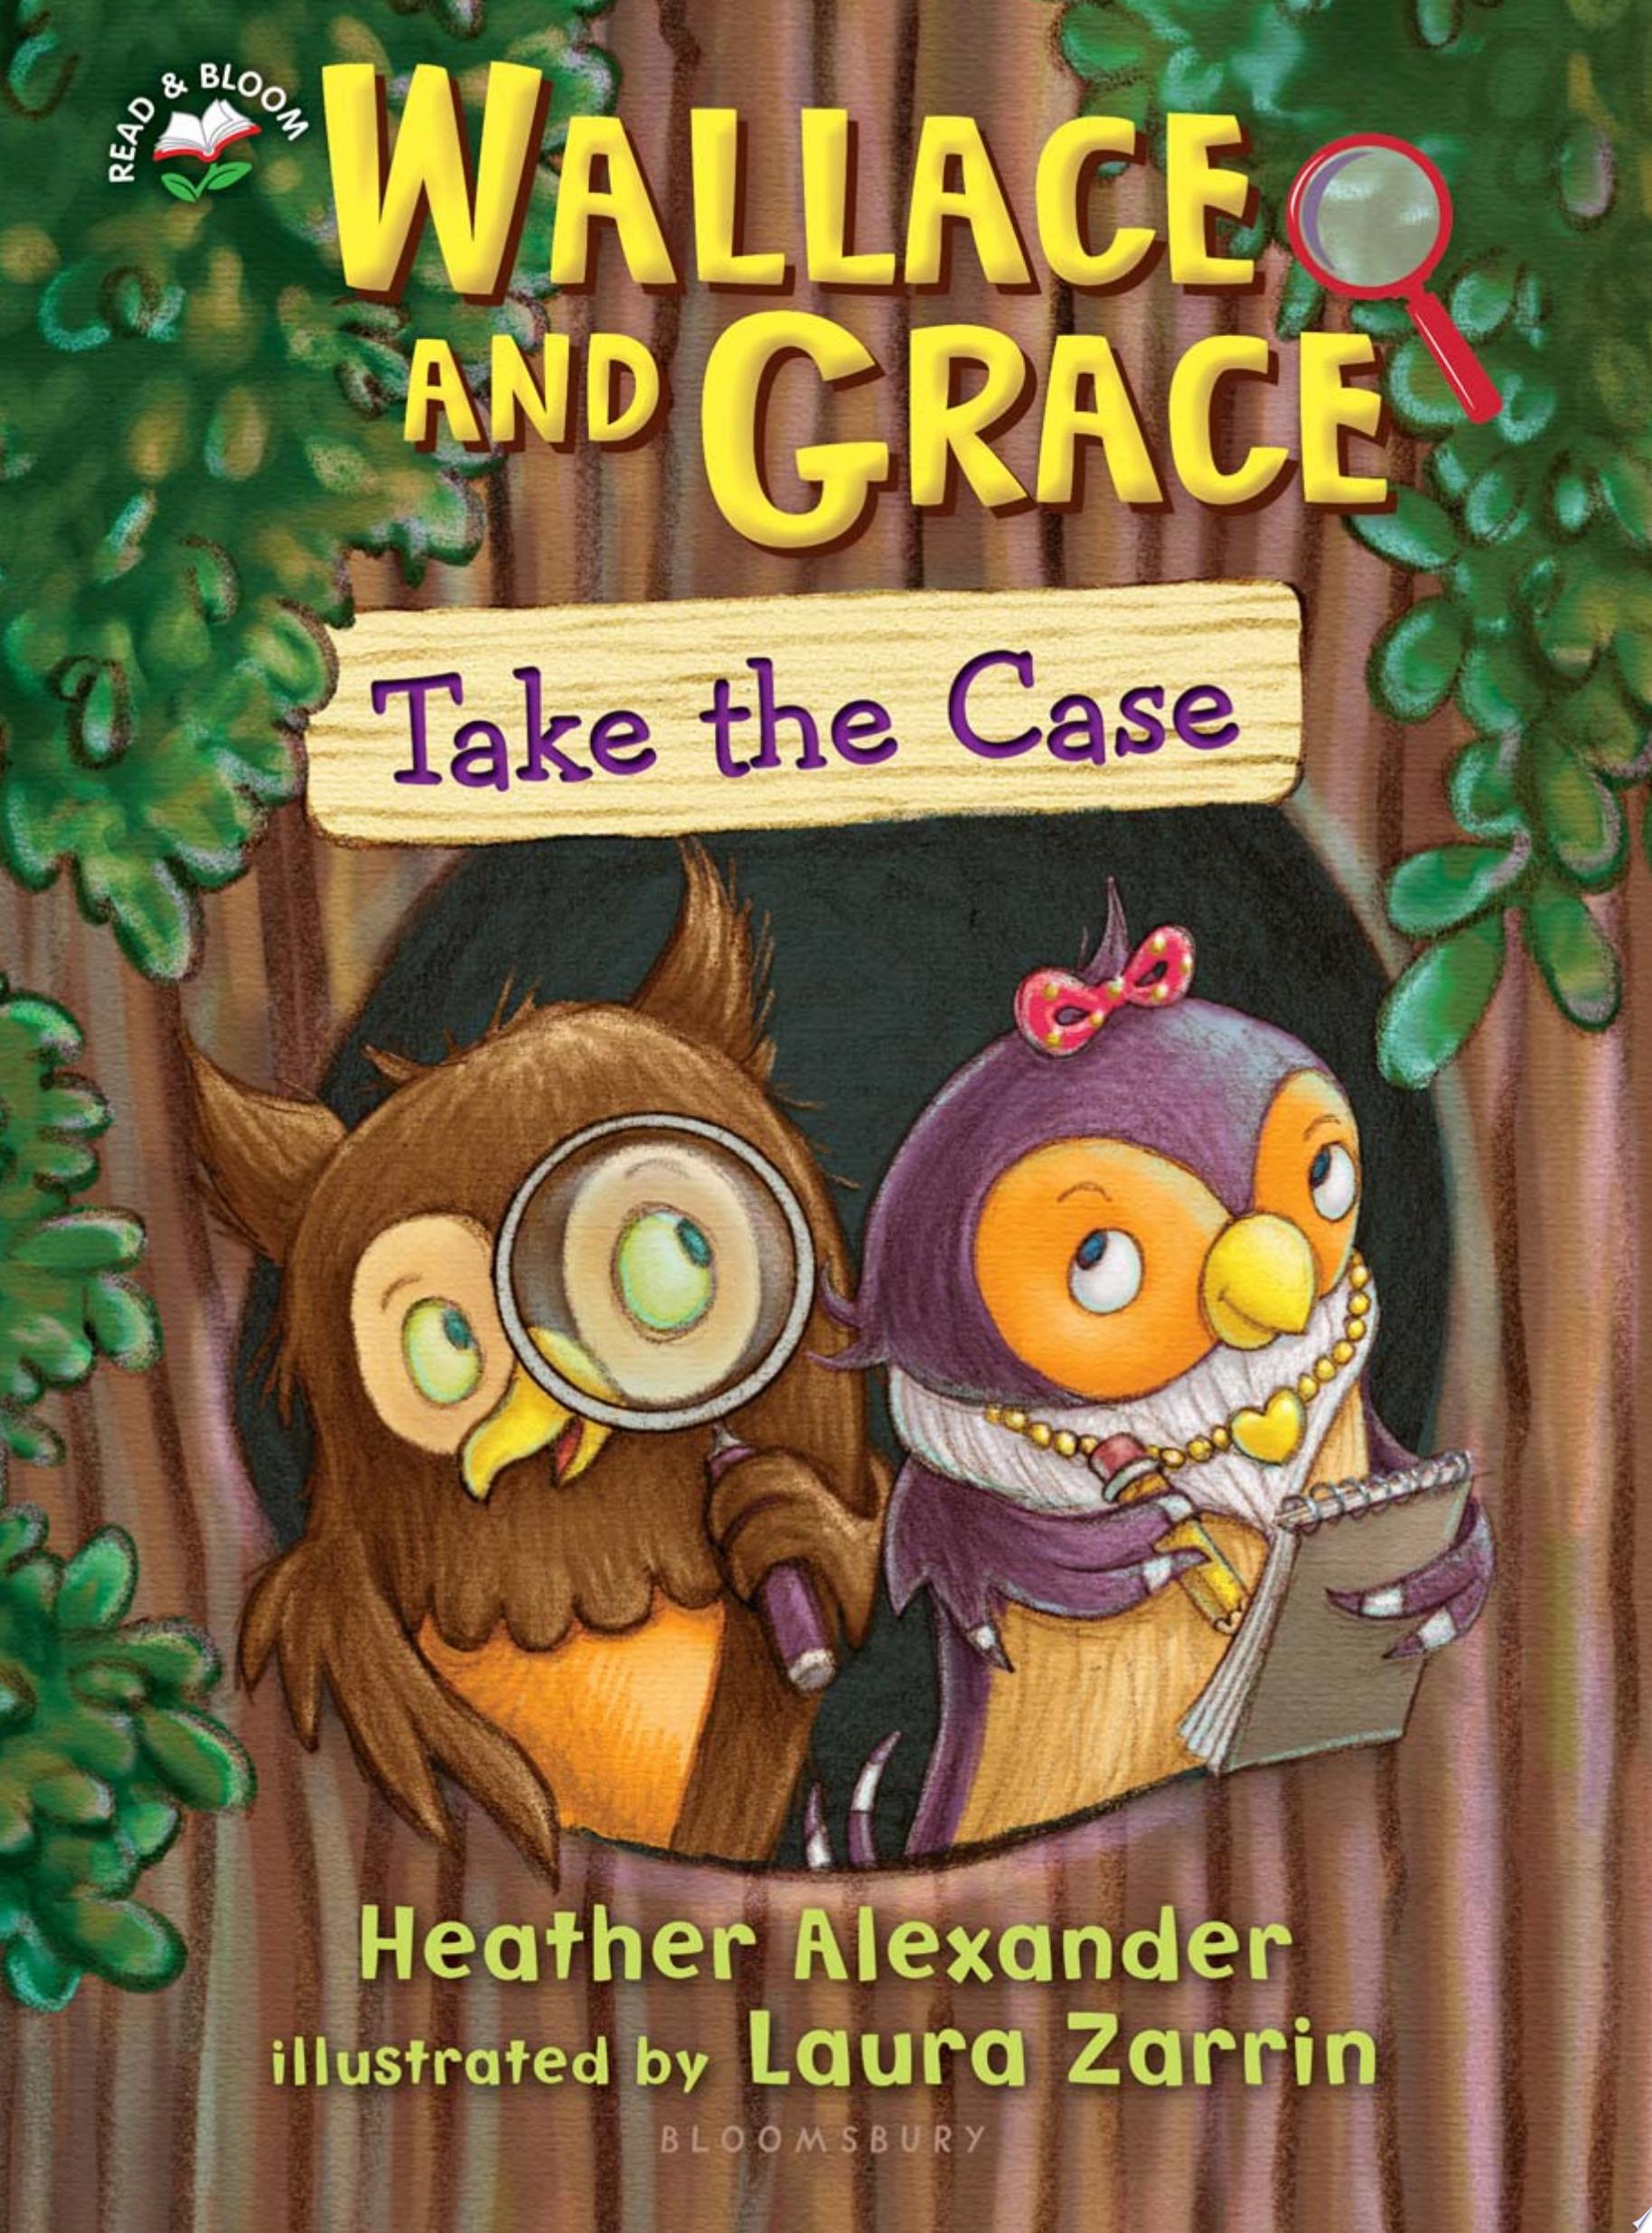 Image for "Wallace and Grace Take the Case"